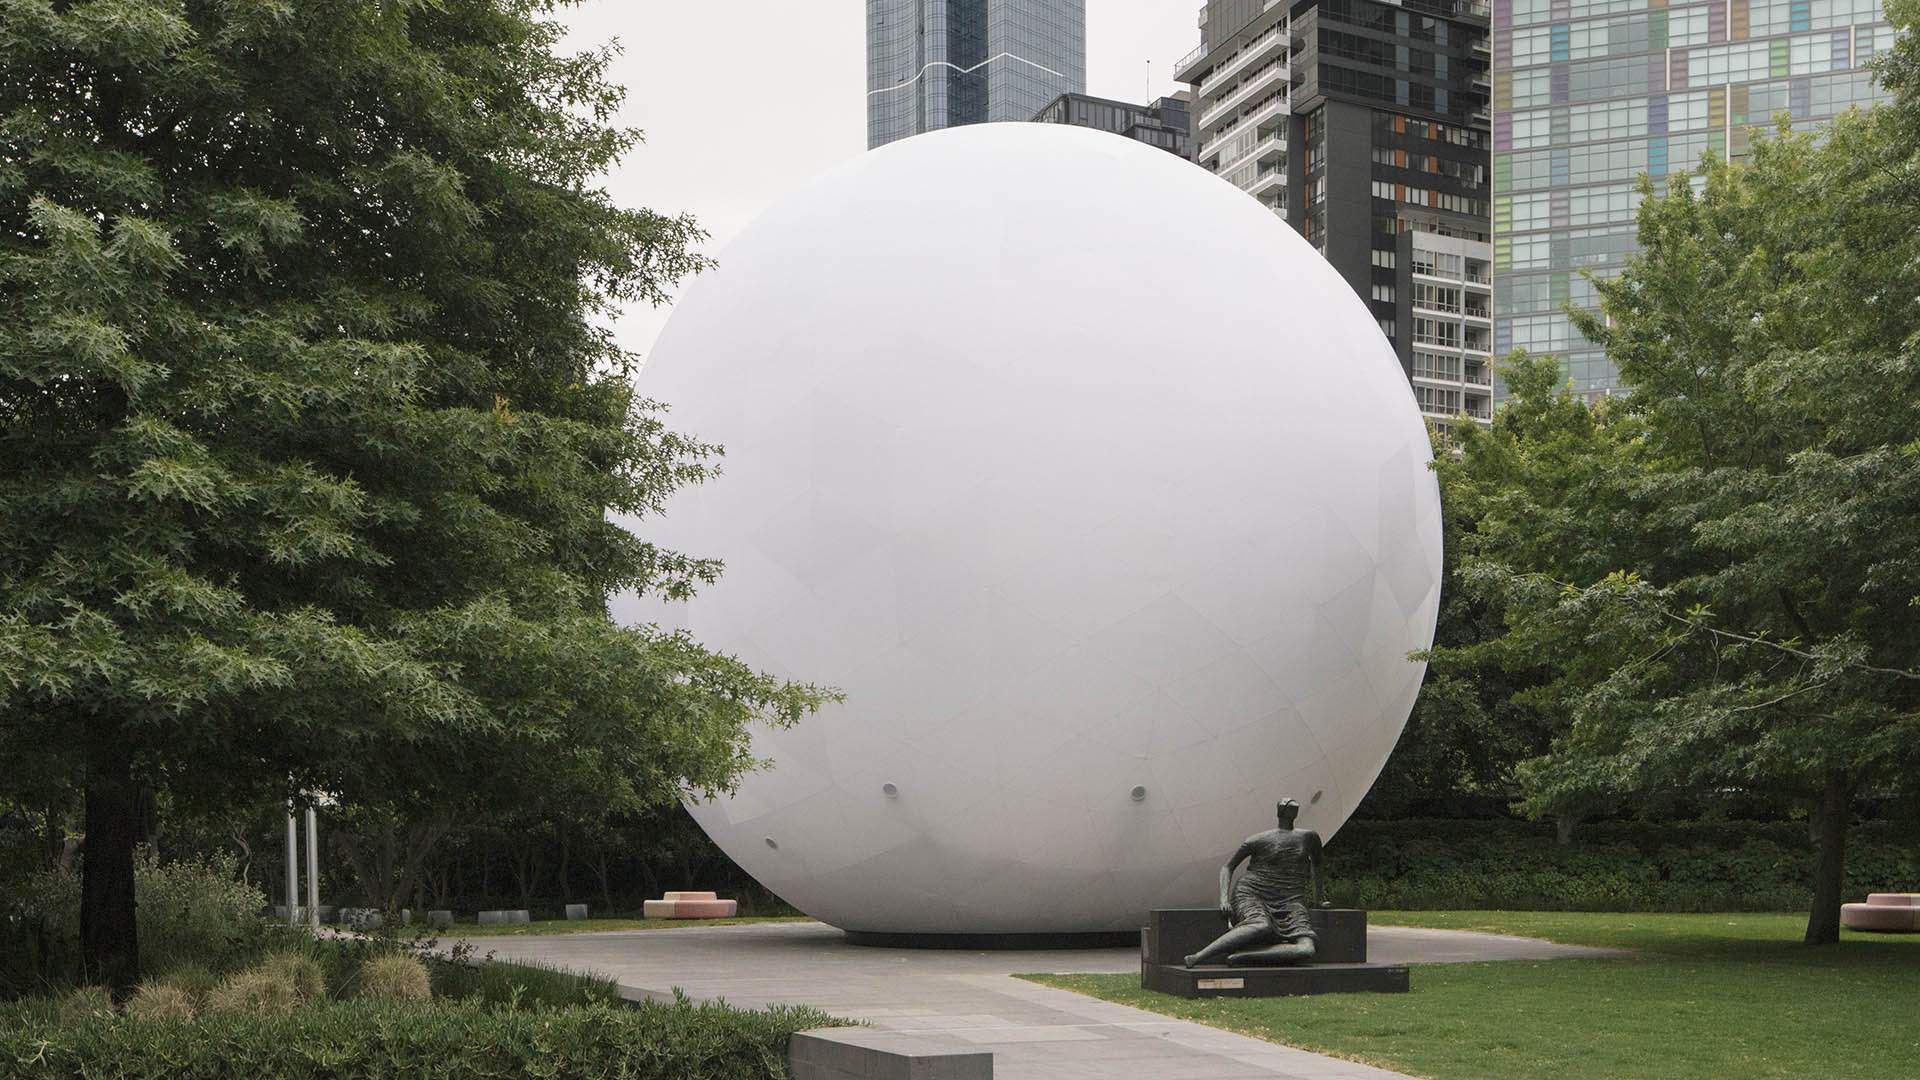 Meet Australia's New Big Thing: A 14-Metre-Tall Inflatable Sphere That Breathes Air Has Popped Up in Melbourne